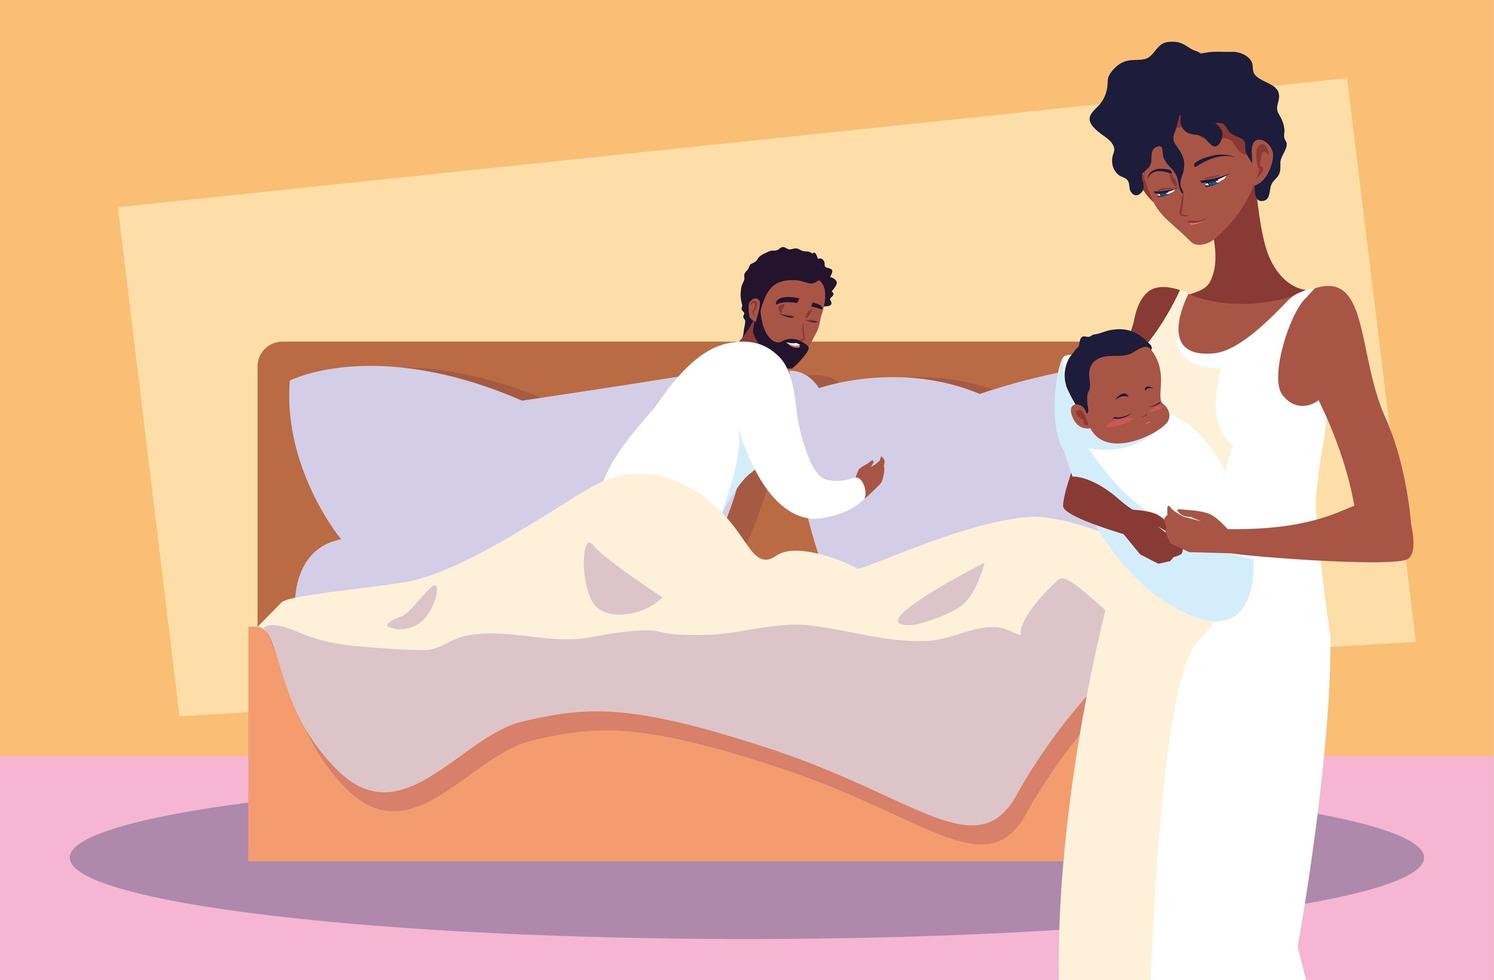 parents afro with baby boy resting in bed vector